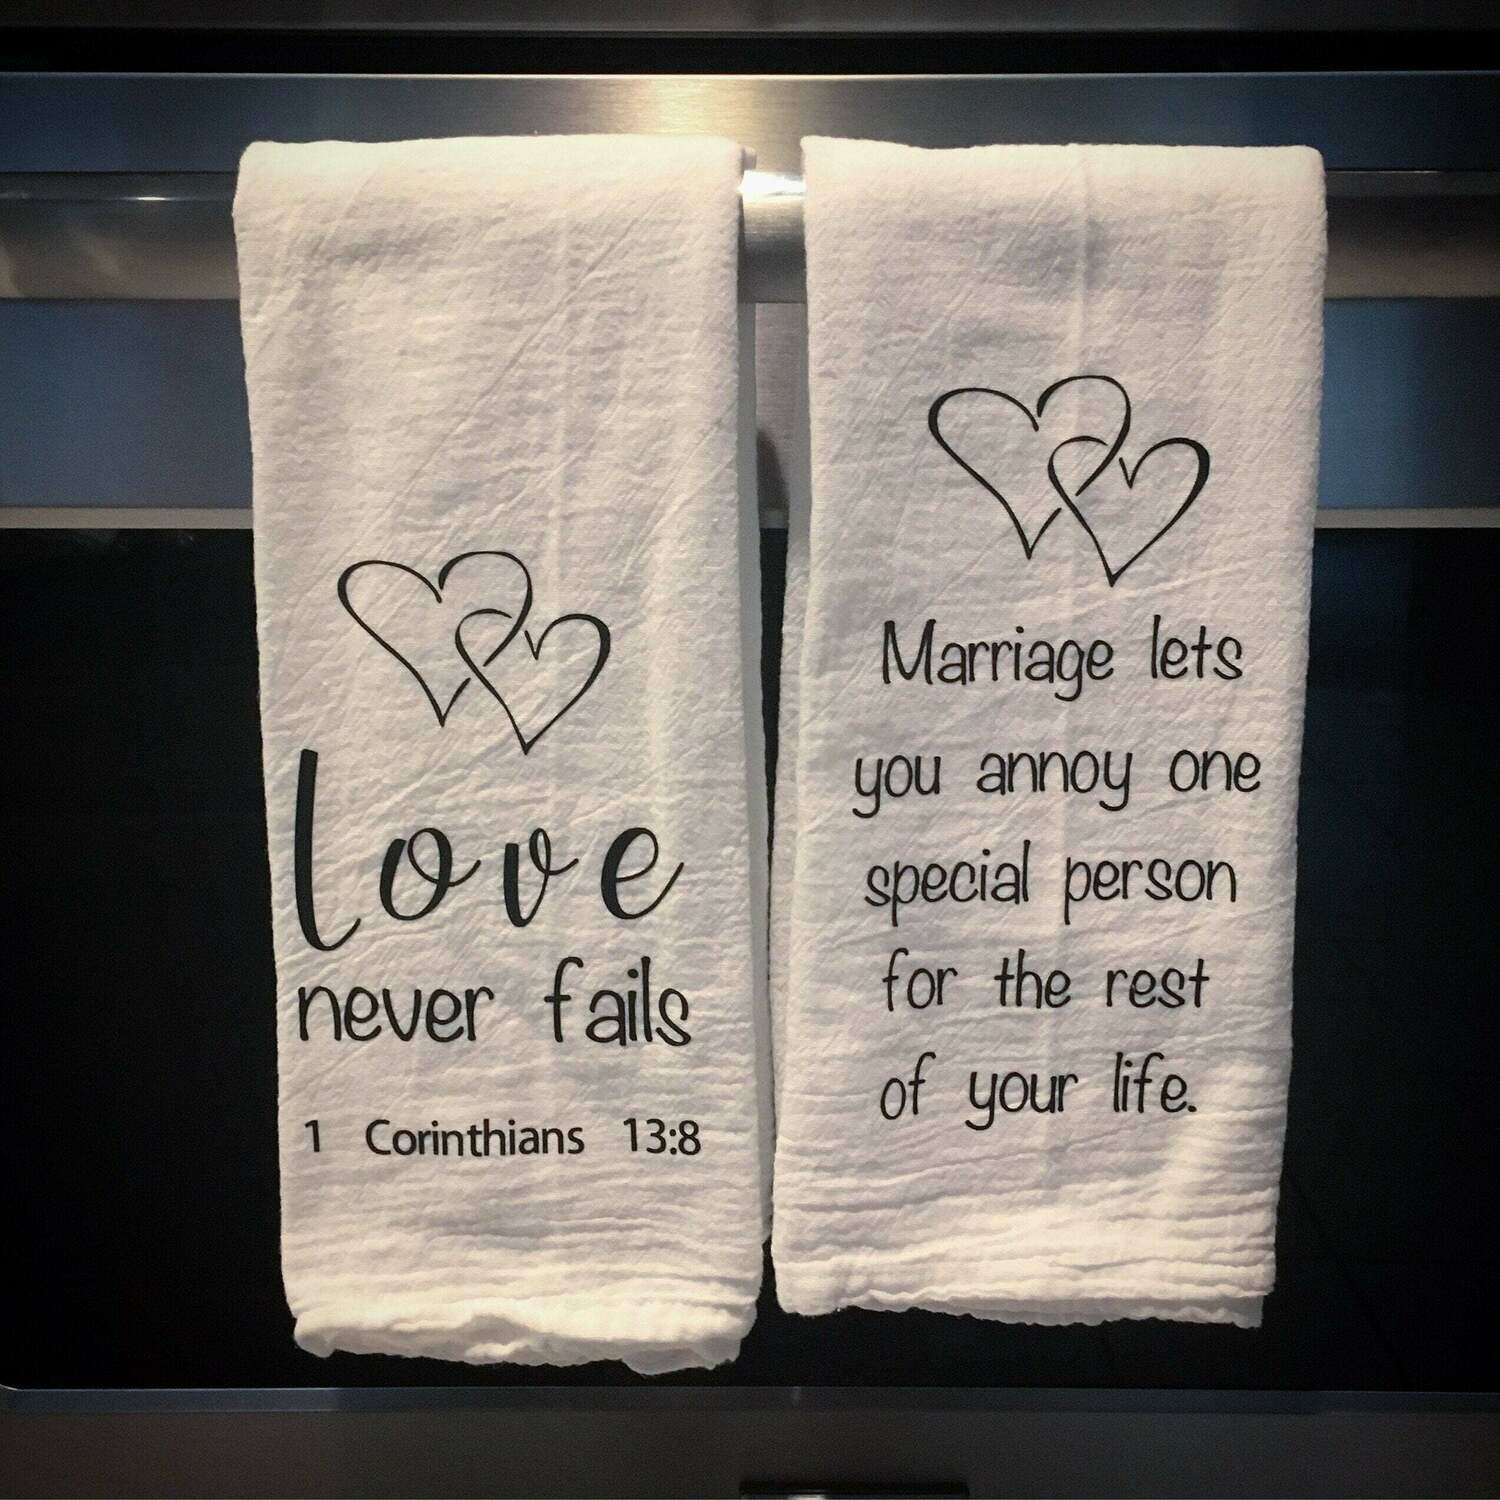 Tea towel-love never fails, 1 corinthians 13:8, hearts, marriage lets you annoy one special person for the rest of your life